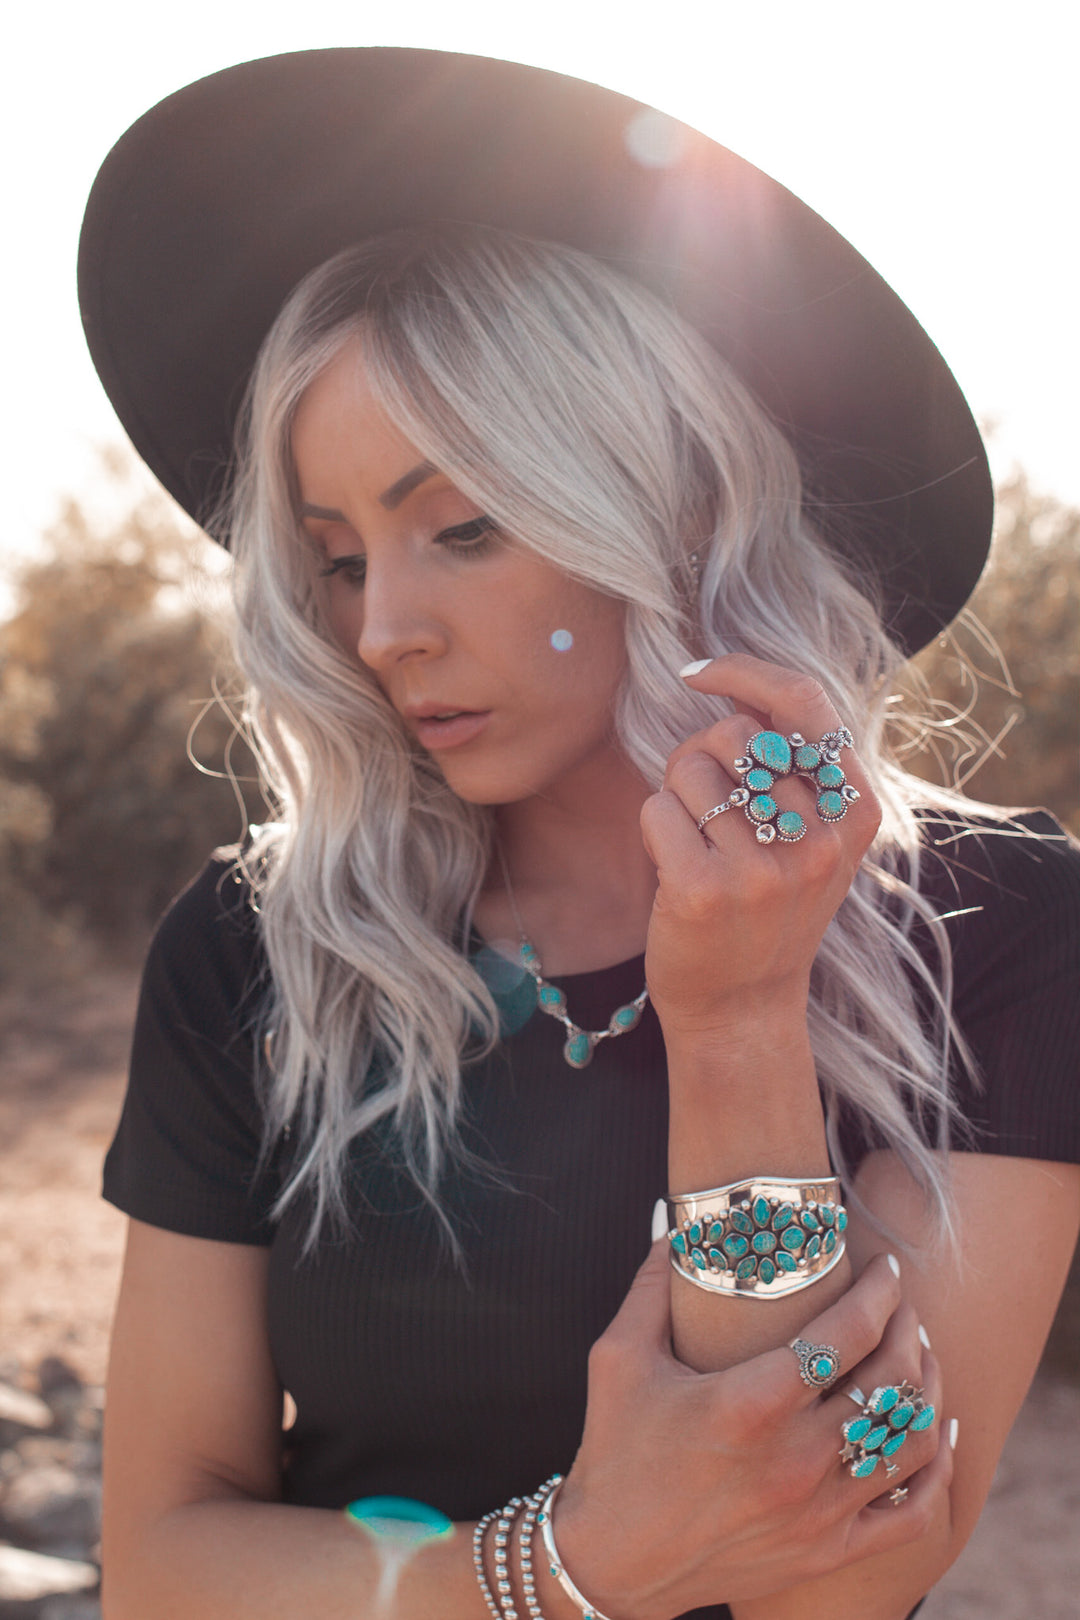 Shop Western and Boho Jewelry with Krush Kandy Boutique - Featuring One of A Kind Turquoise and Silver Jewelry - an Online Women's Fashion and Jewelry Boutique Located in Phoenix, Arizona - Scottsdale Area